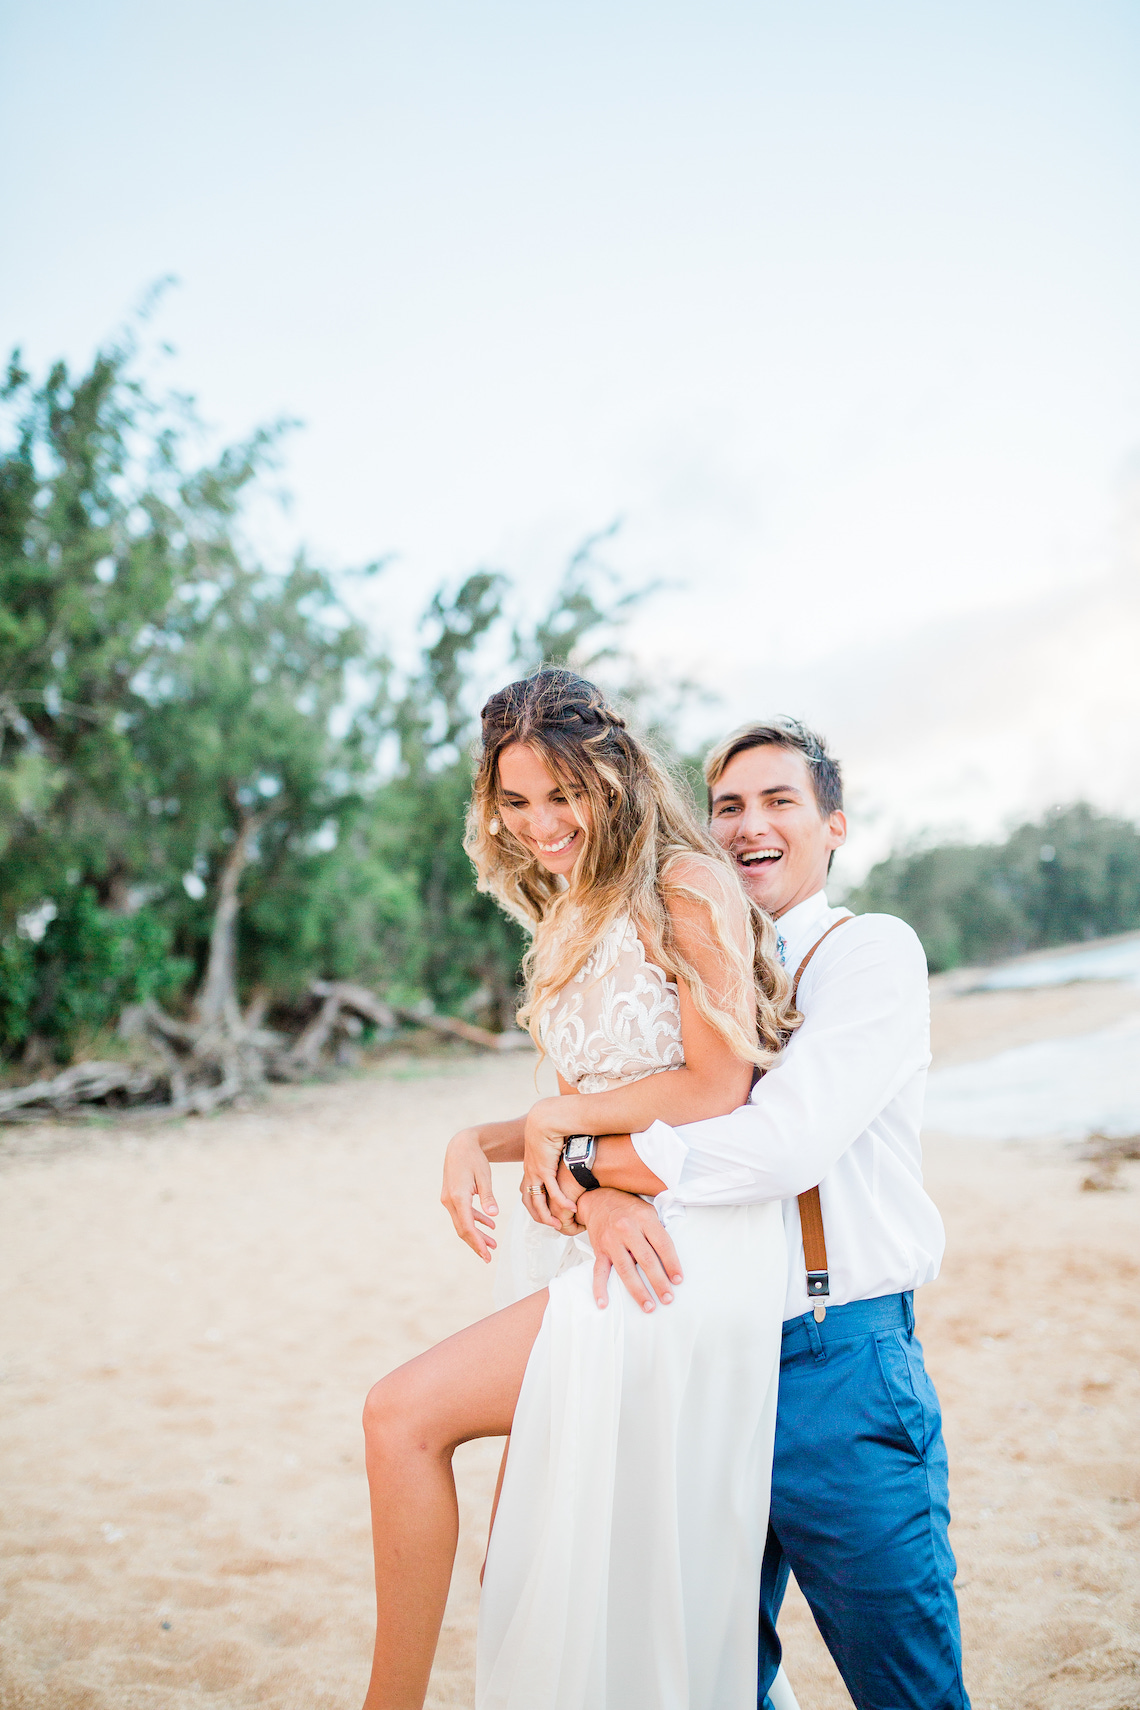 Playful and Intimate North Shore Oahu Beach Wedding – Chelsea Stratso Photography 30